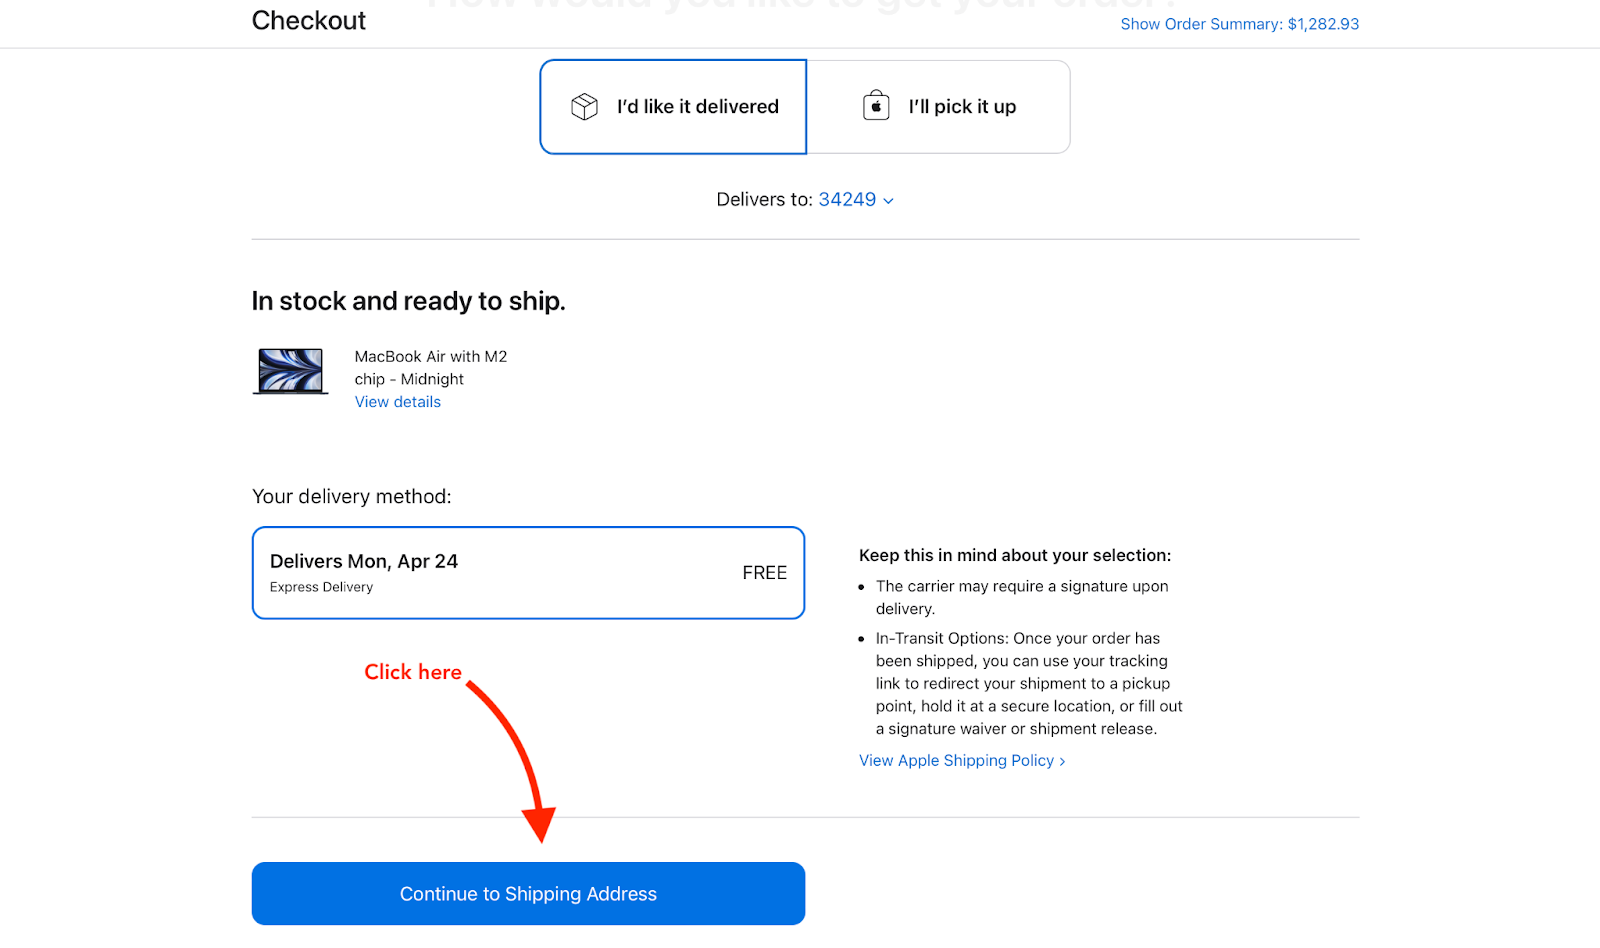 How to Ship Apple Internationally in 3 Easy Steps 2